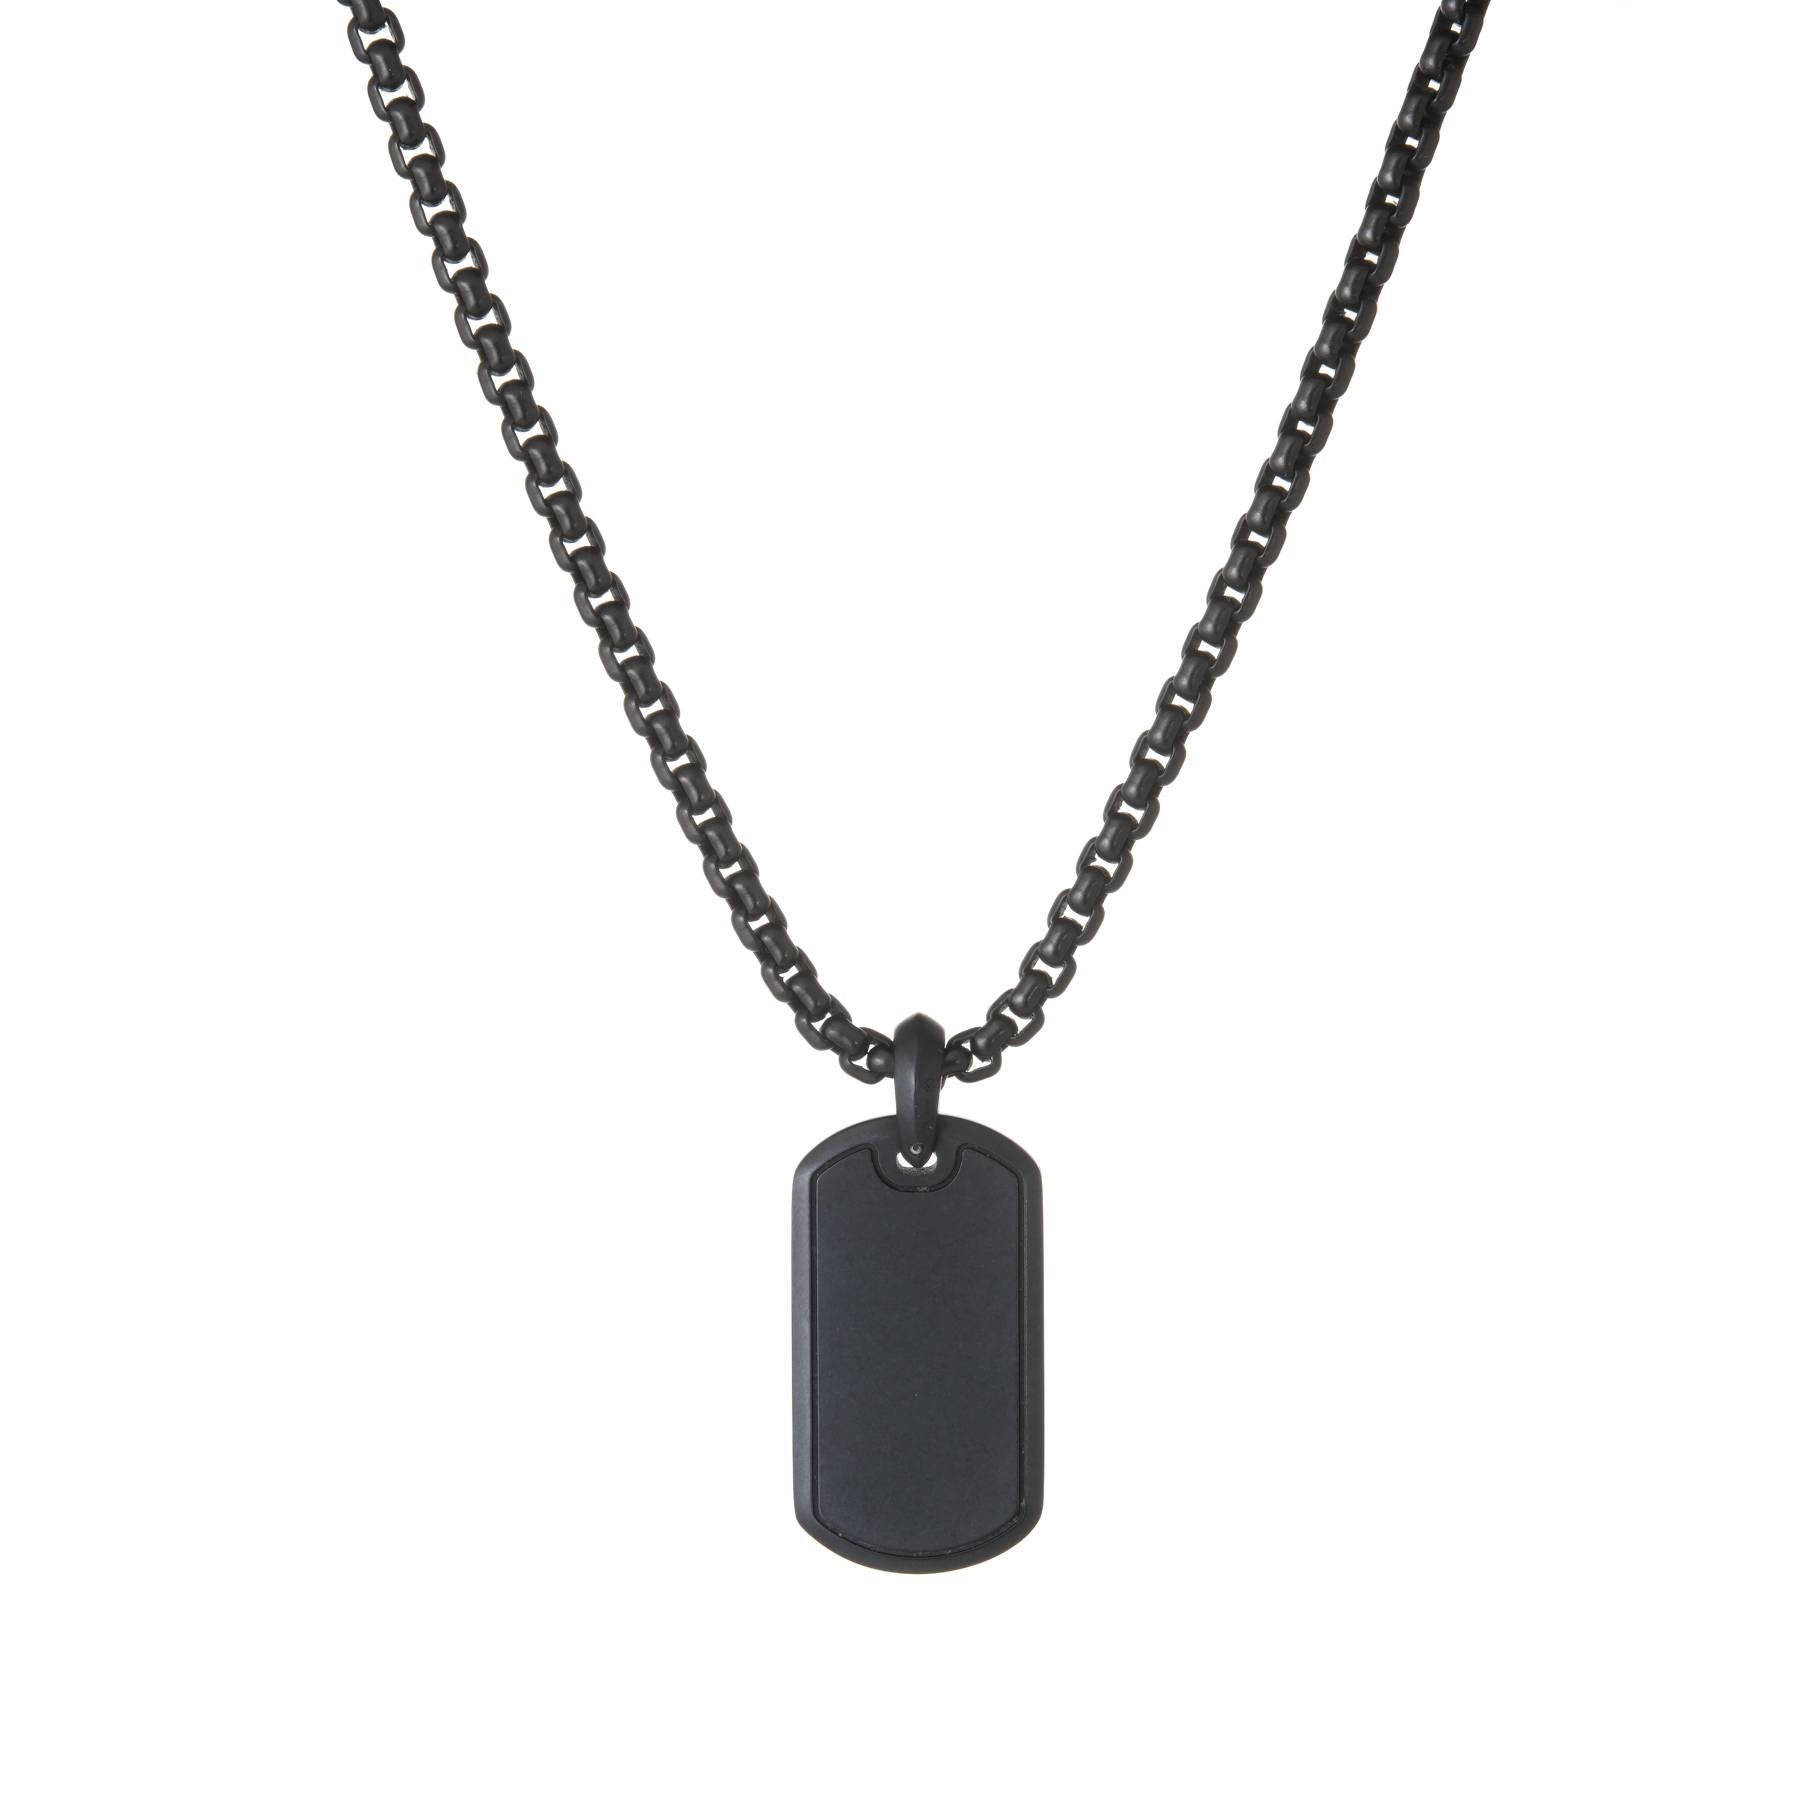 Finely detailed pre owned David Yurman dog tag pendant & necklace, crafted in sterling silver and titanium (tag) and darkened stainless steel (chain). 

Black diamonds are pave set into the mount and total an estimated 2.68 carats. The diamonds are